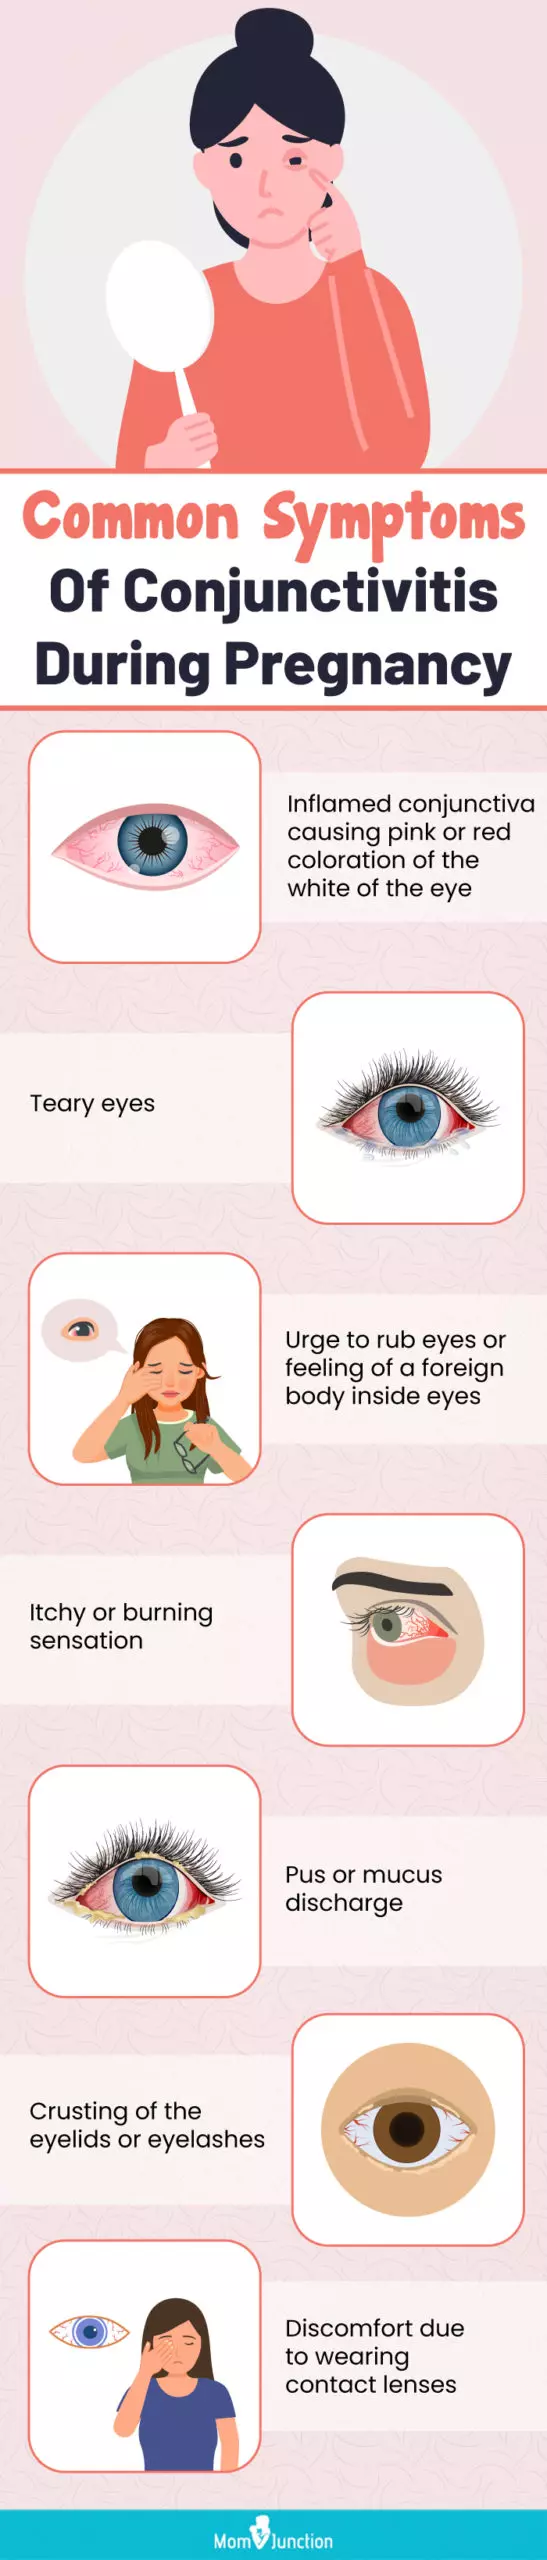 common symptoms of conjunctivitis during pregnancy (infographic)